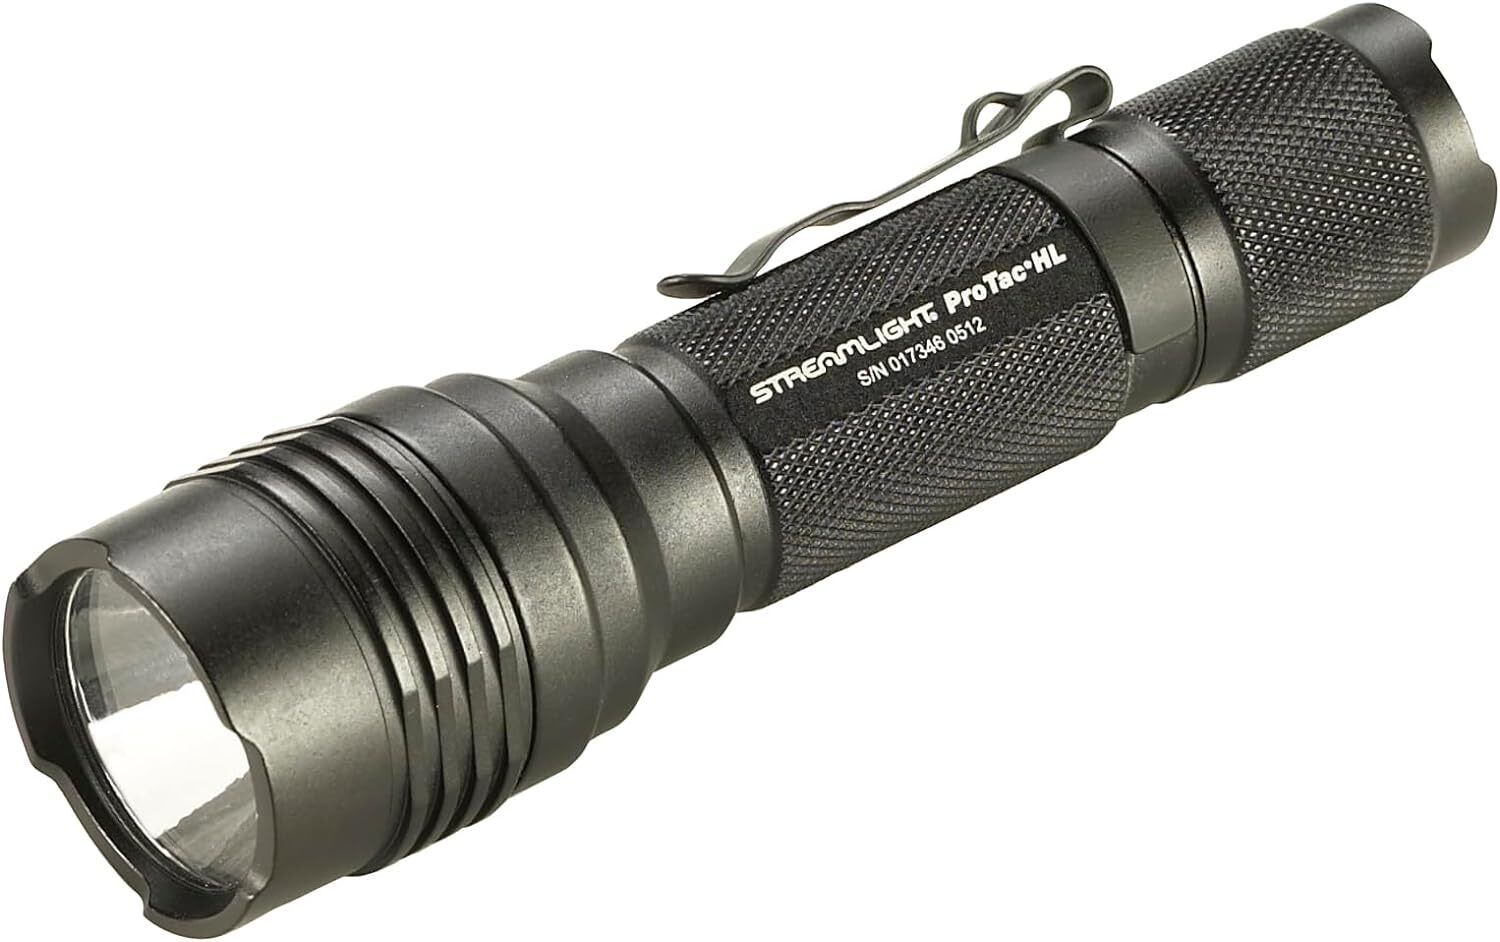 88040 ProTac HL 750-Lumen Professional Tactical Flashlight with CR123A Batteries